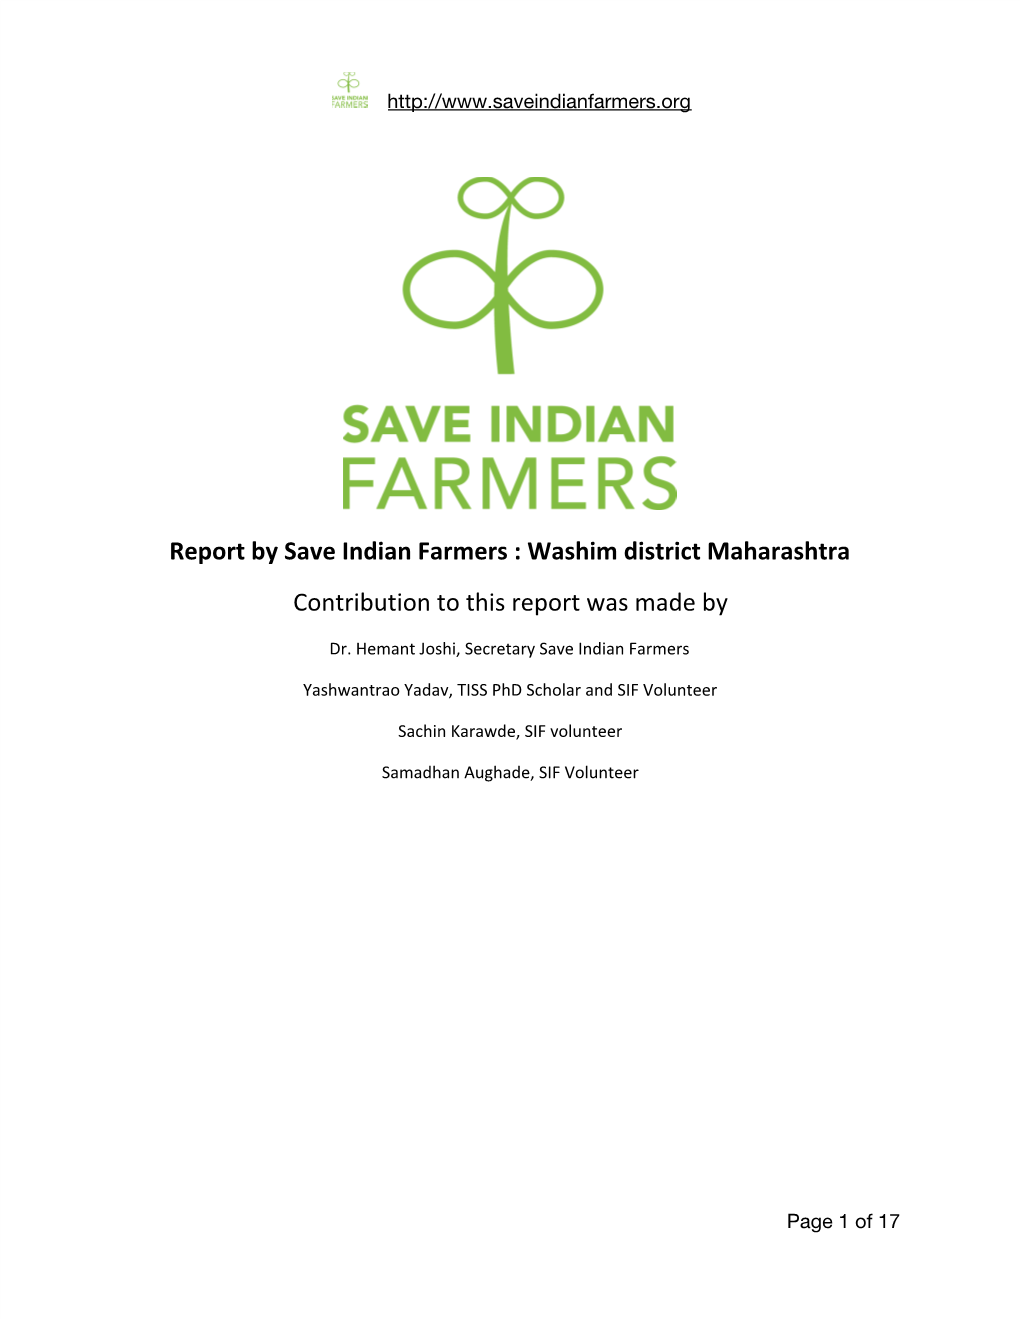 Report by Save Indian Farmers : Washim District Maharashtra